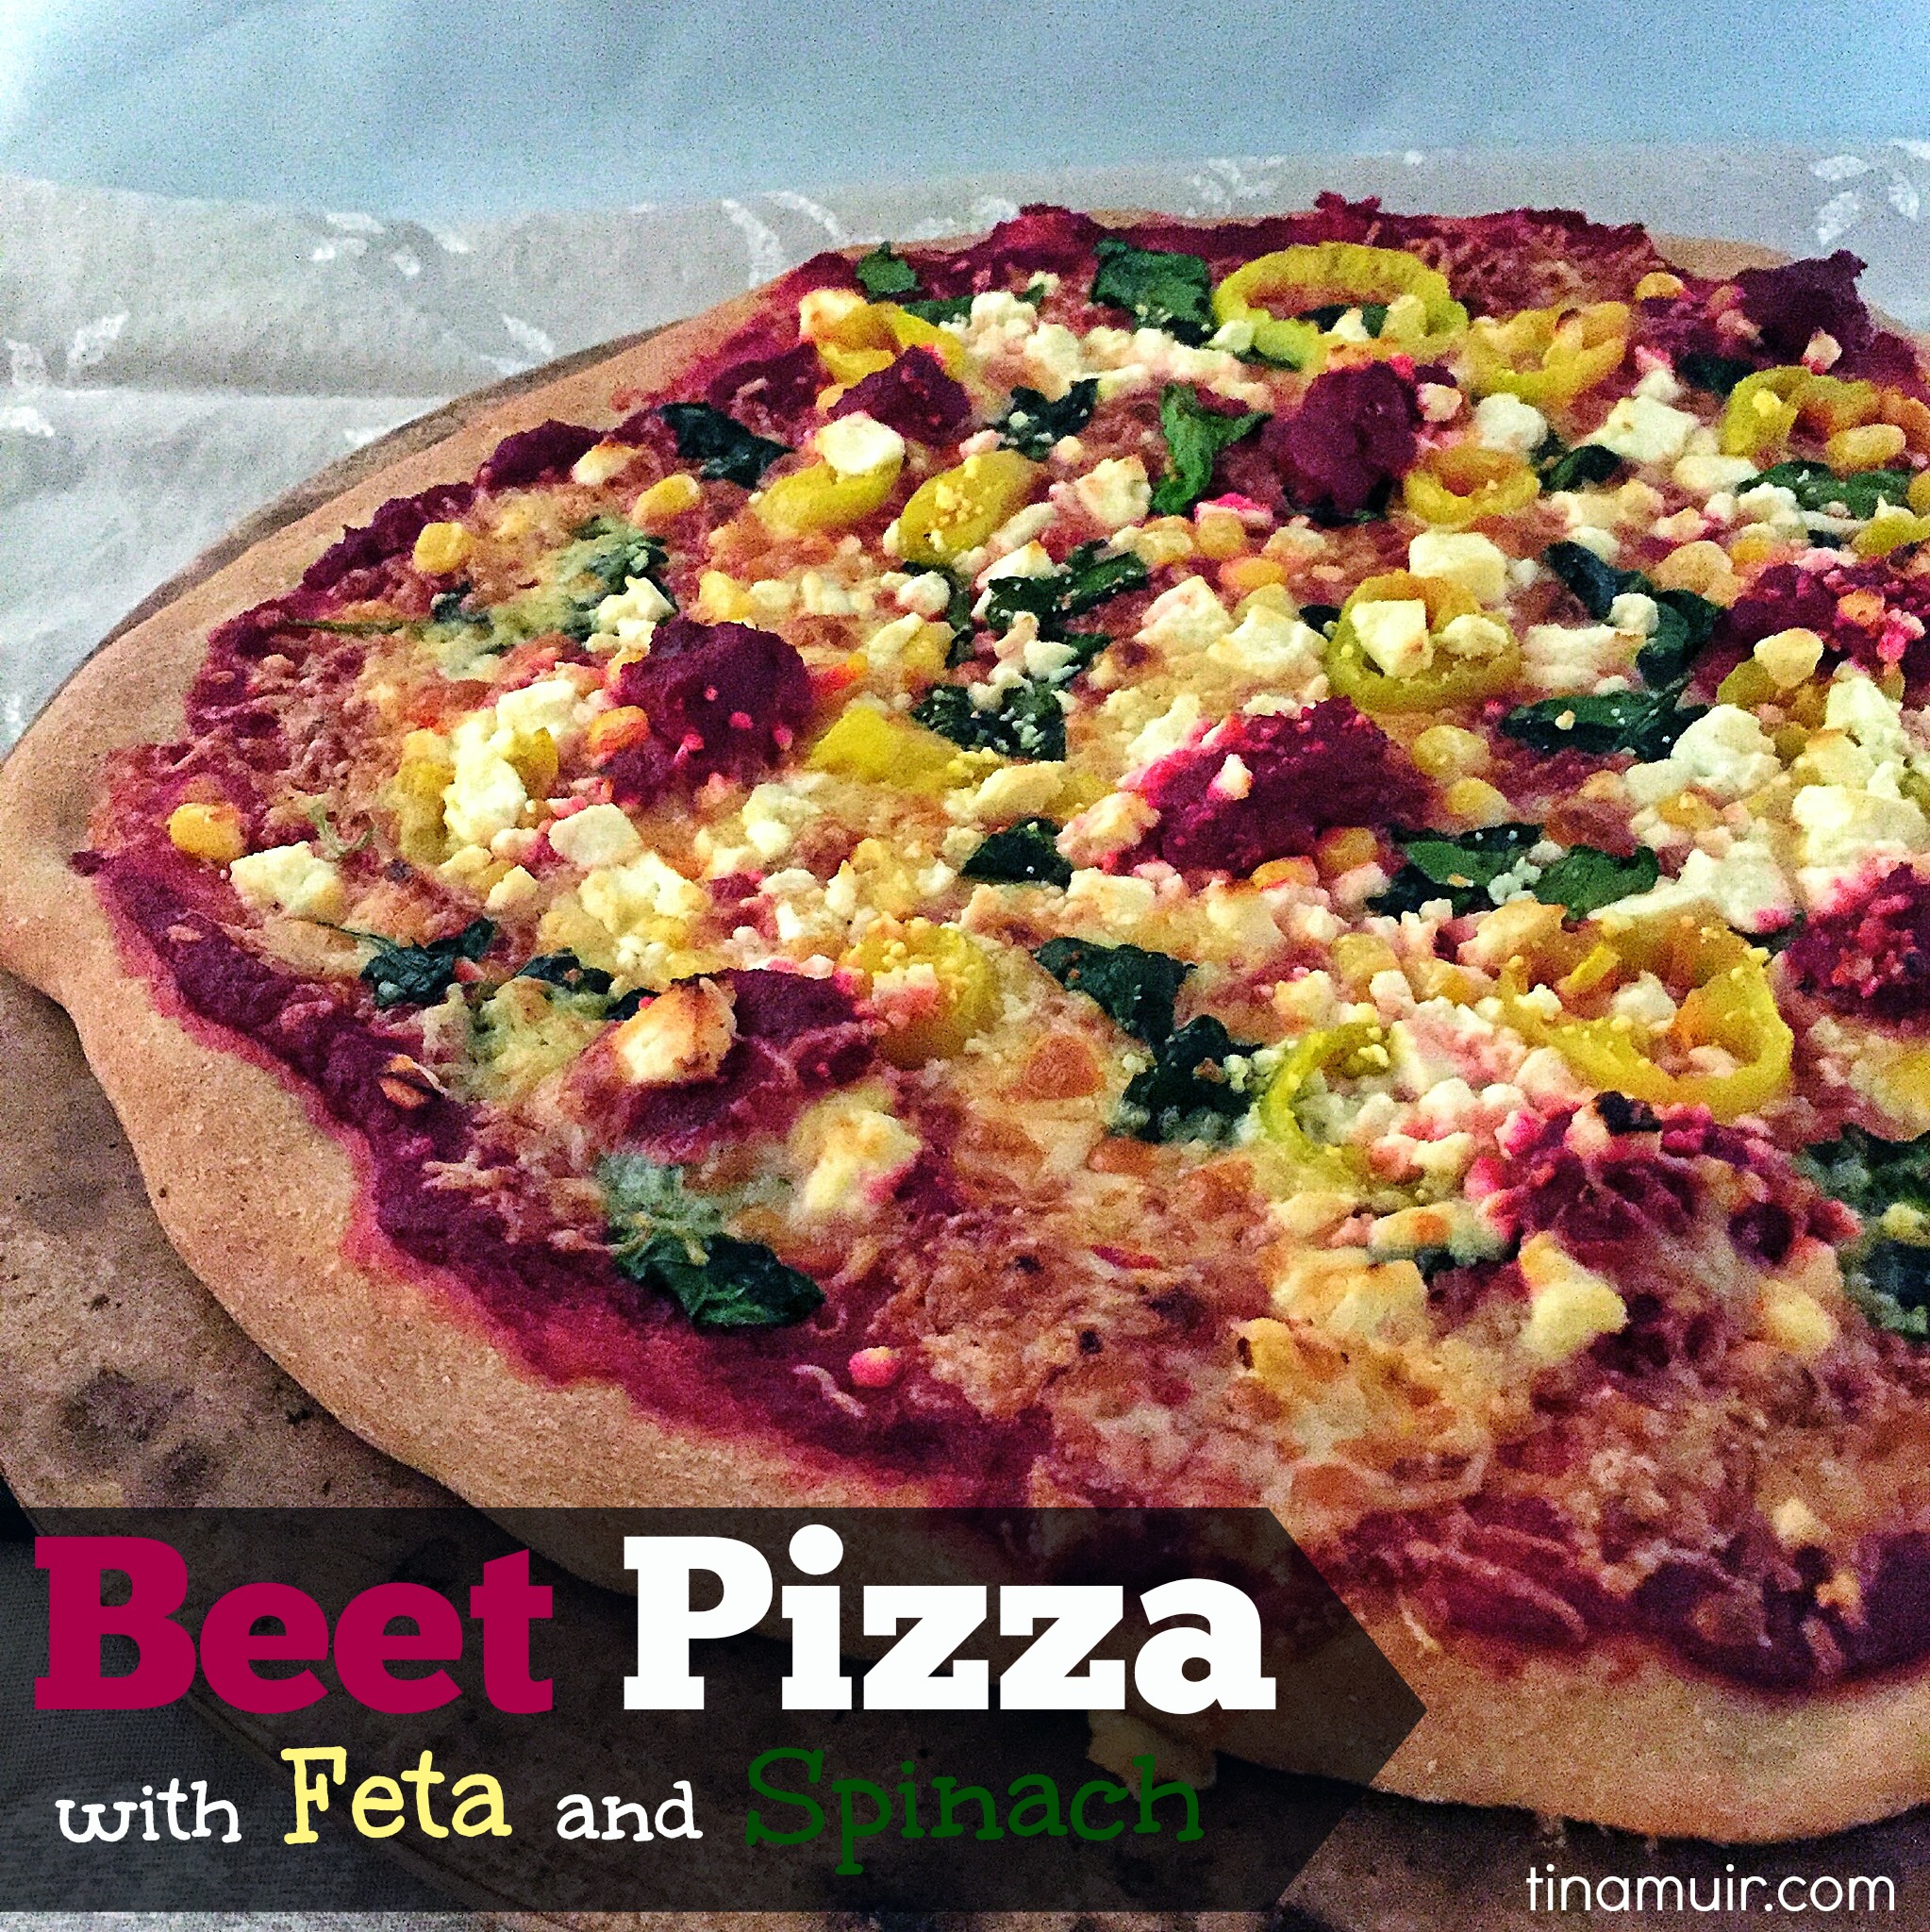 This delicious, healthy pizza is made with pureed beets instead of tomato sauce. Absolutely delicious, and a favorite of elite runner @tinamuir88